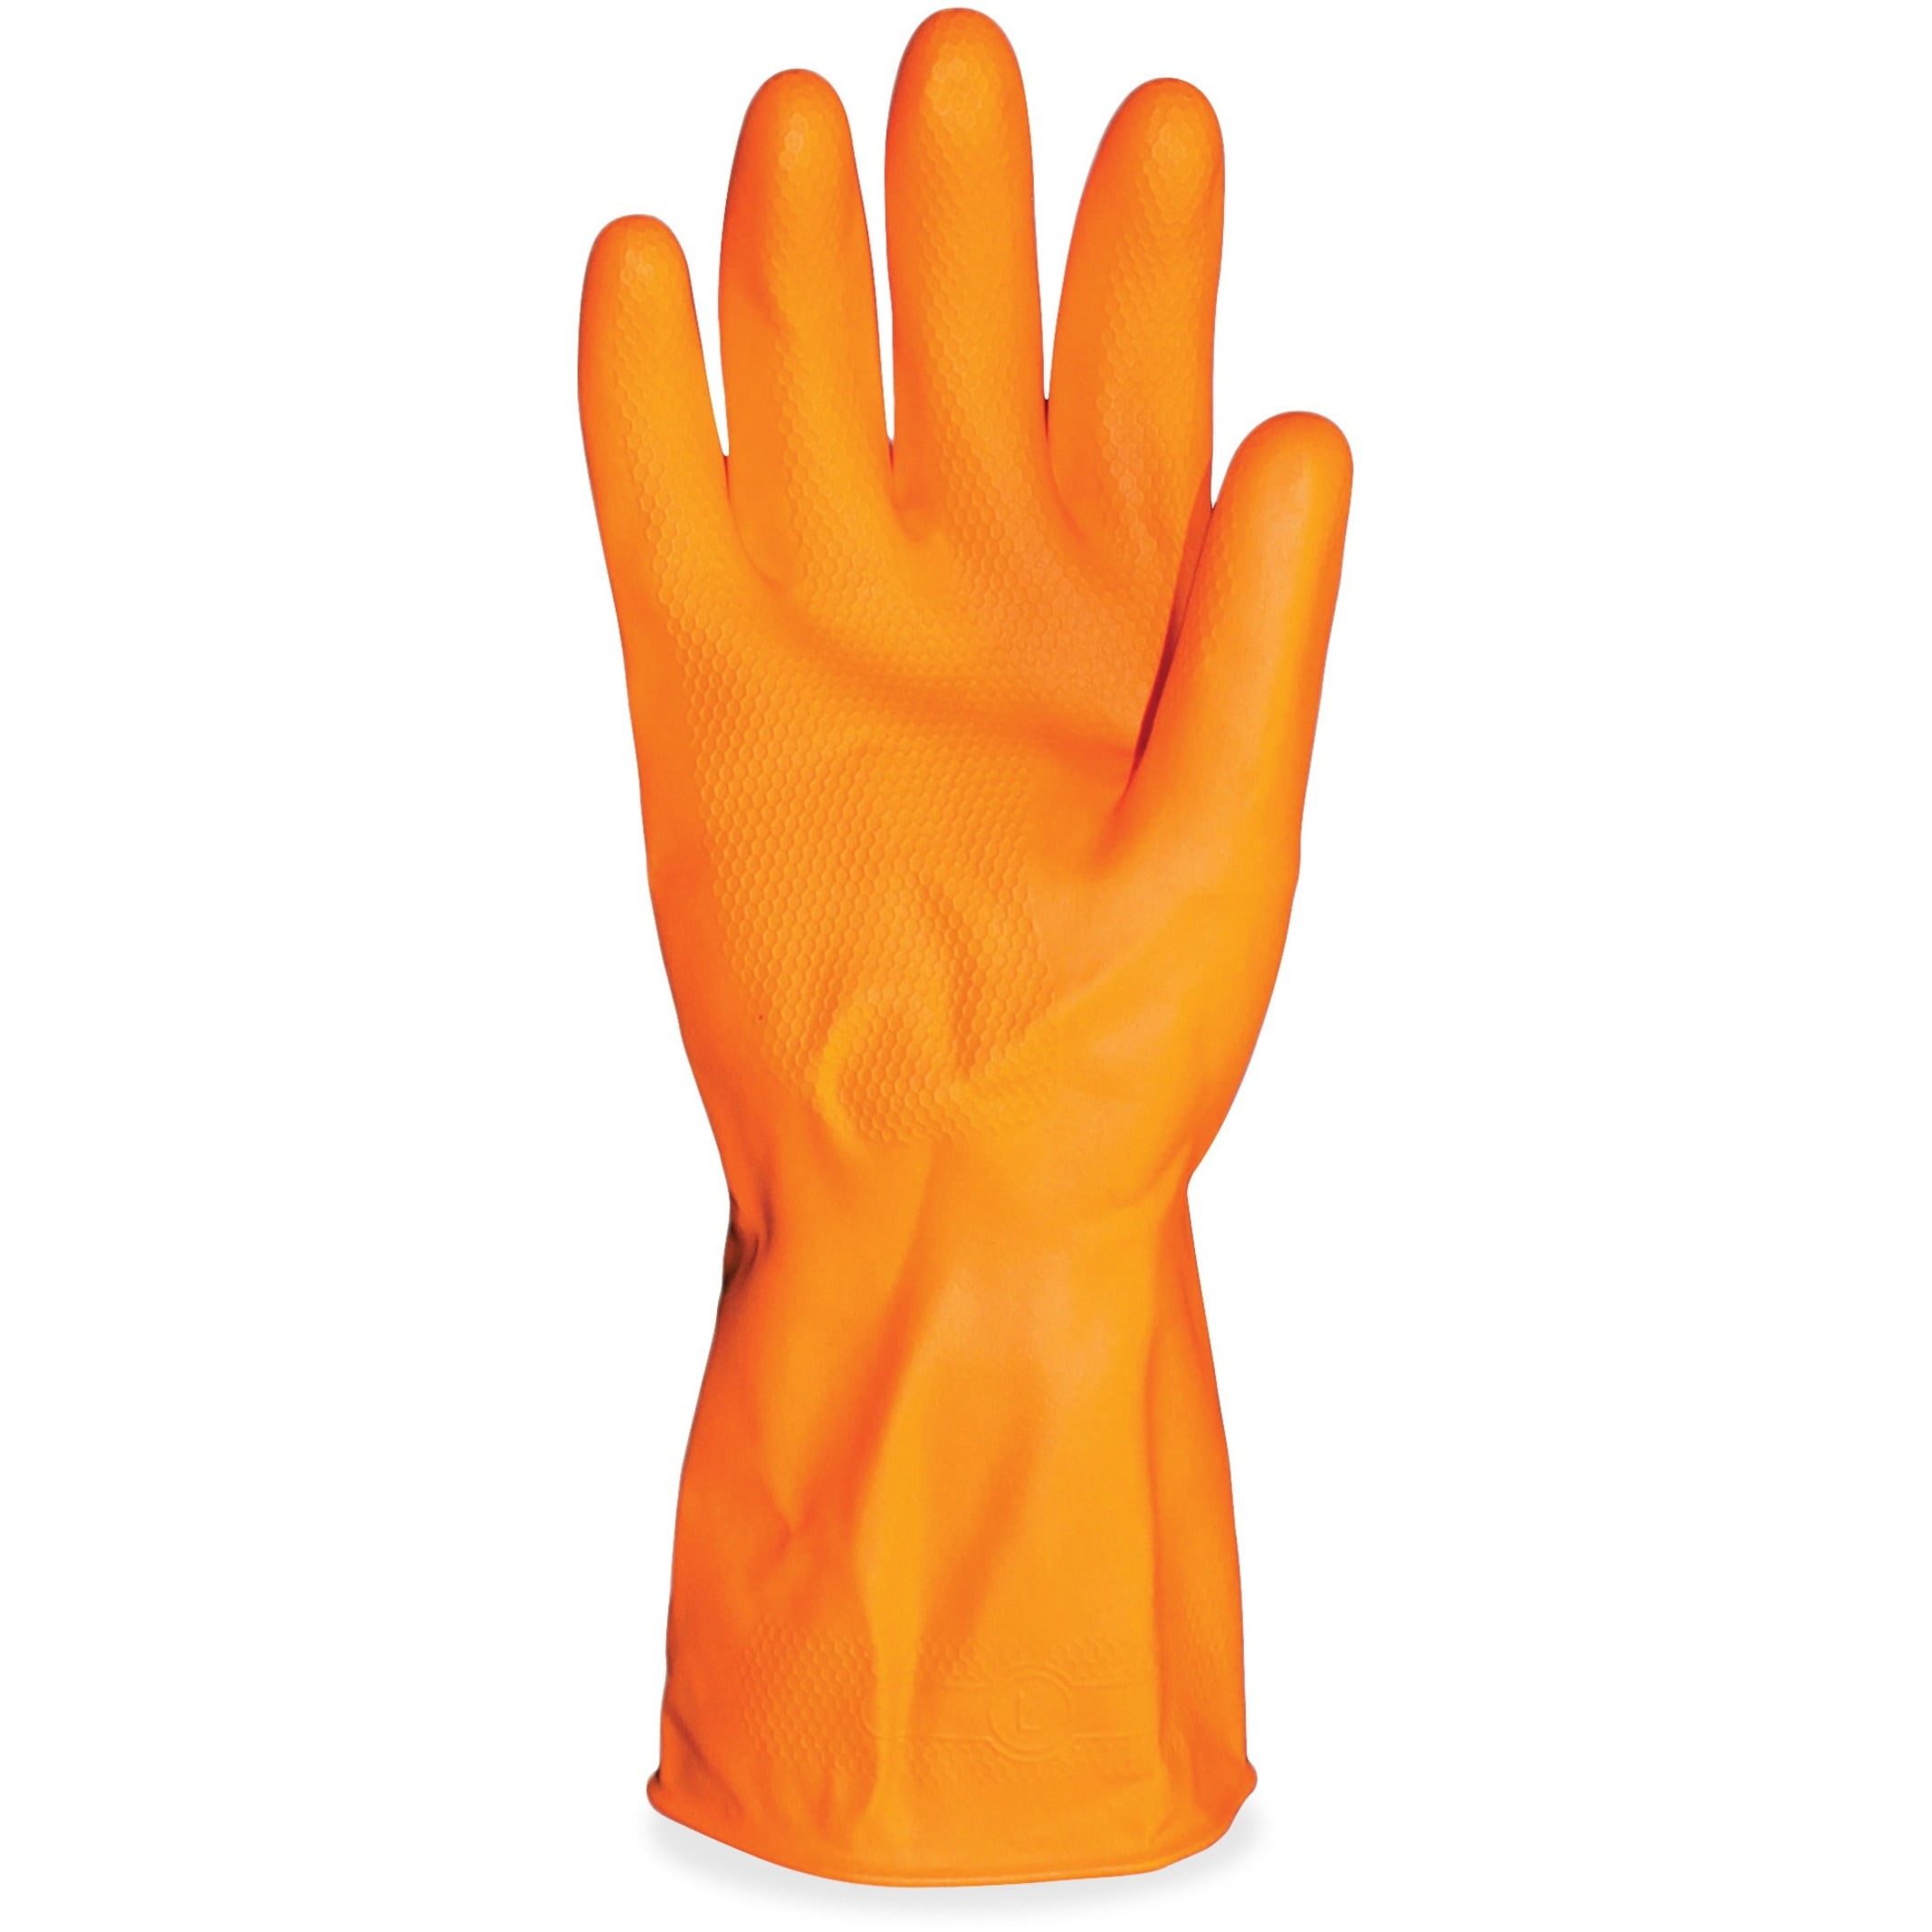 X-large Size Proguard Deluxe Flock Lined Latex Gloves Embossed Grip Extra